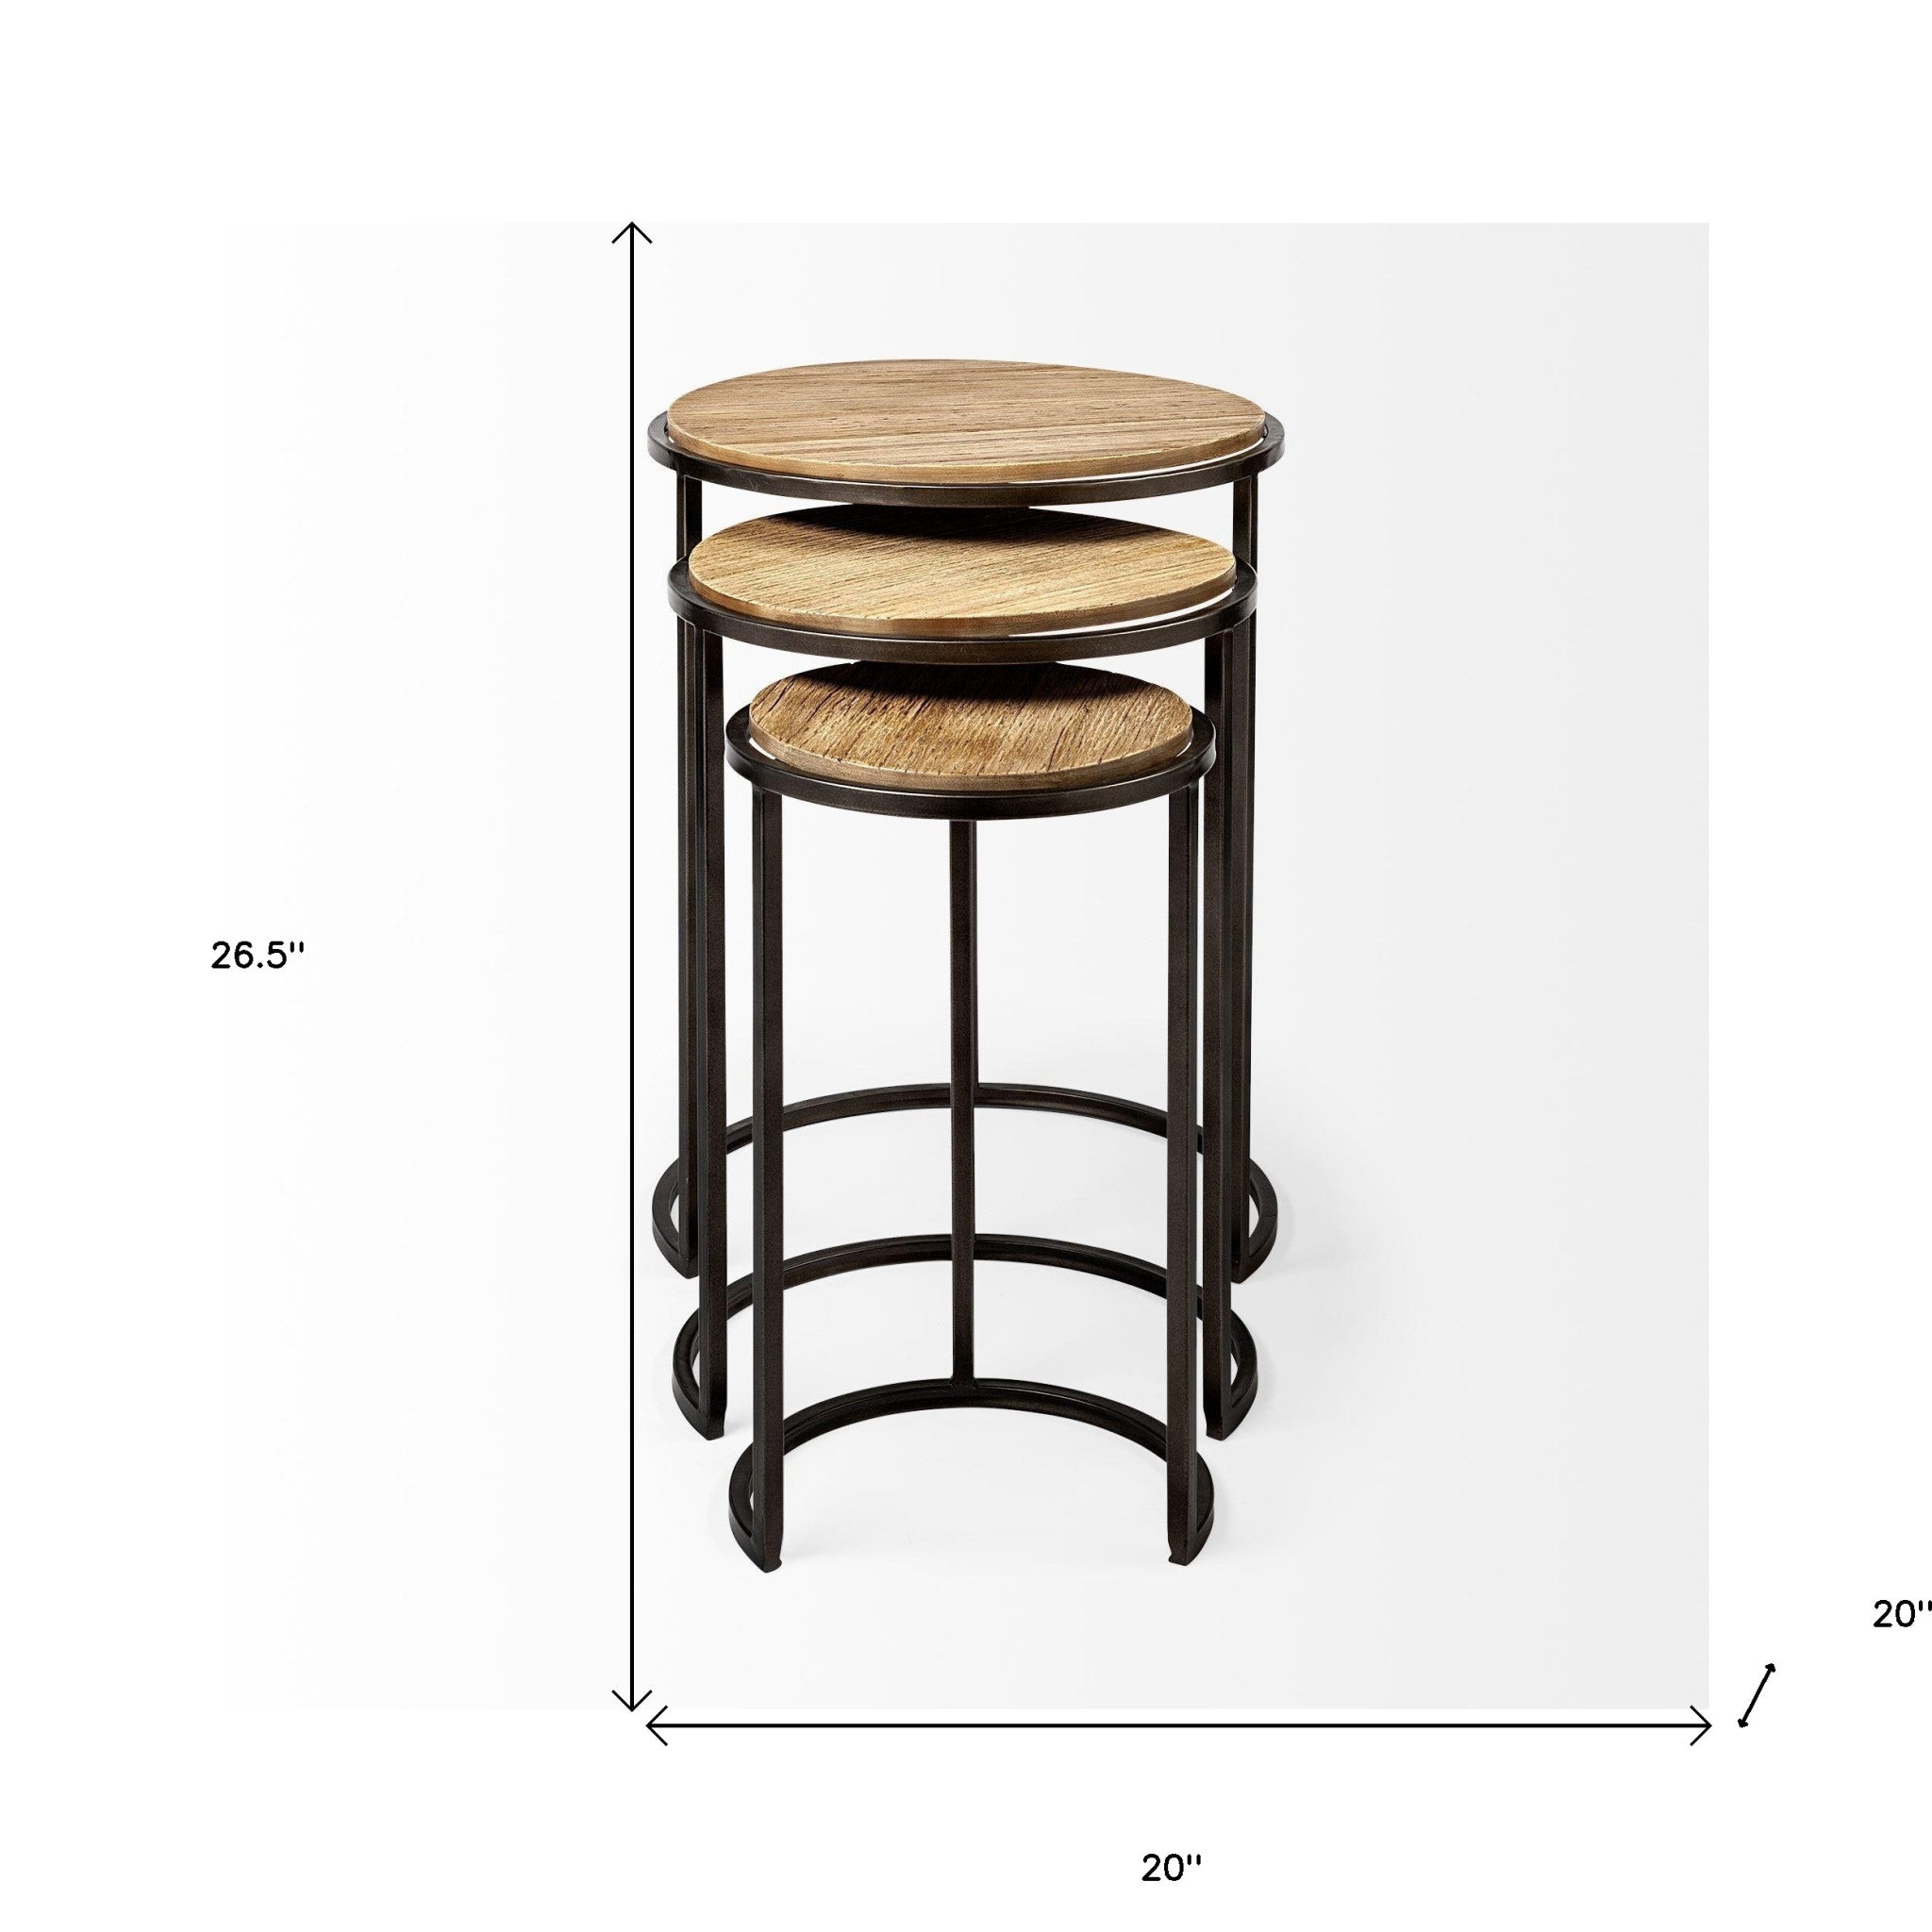 Set Of 3 Brown Wood Round Top Accent Tables With Iron Nesting